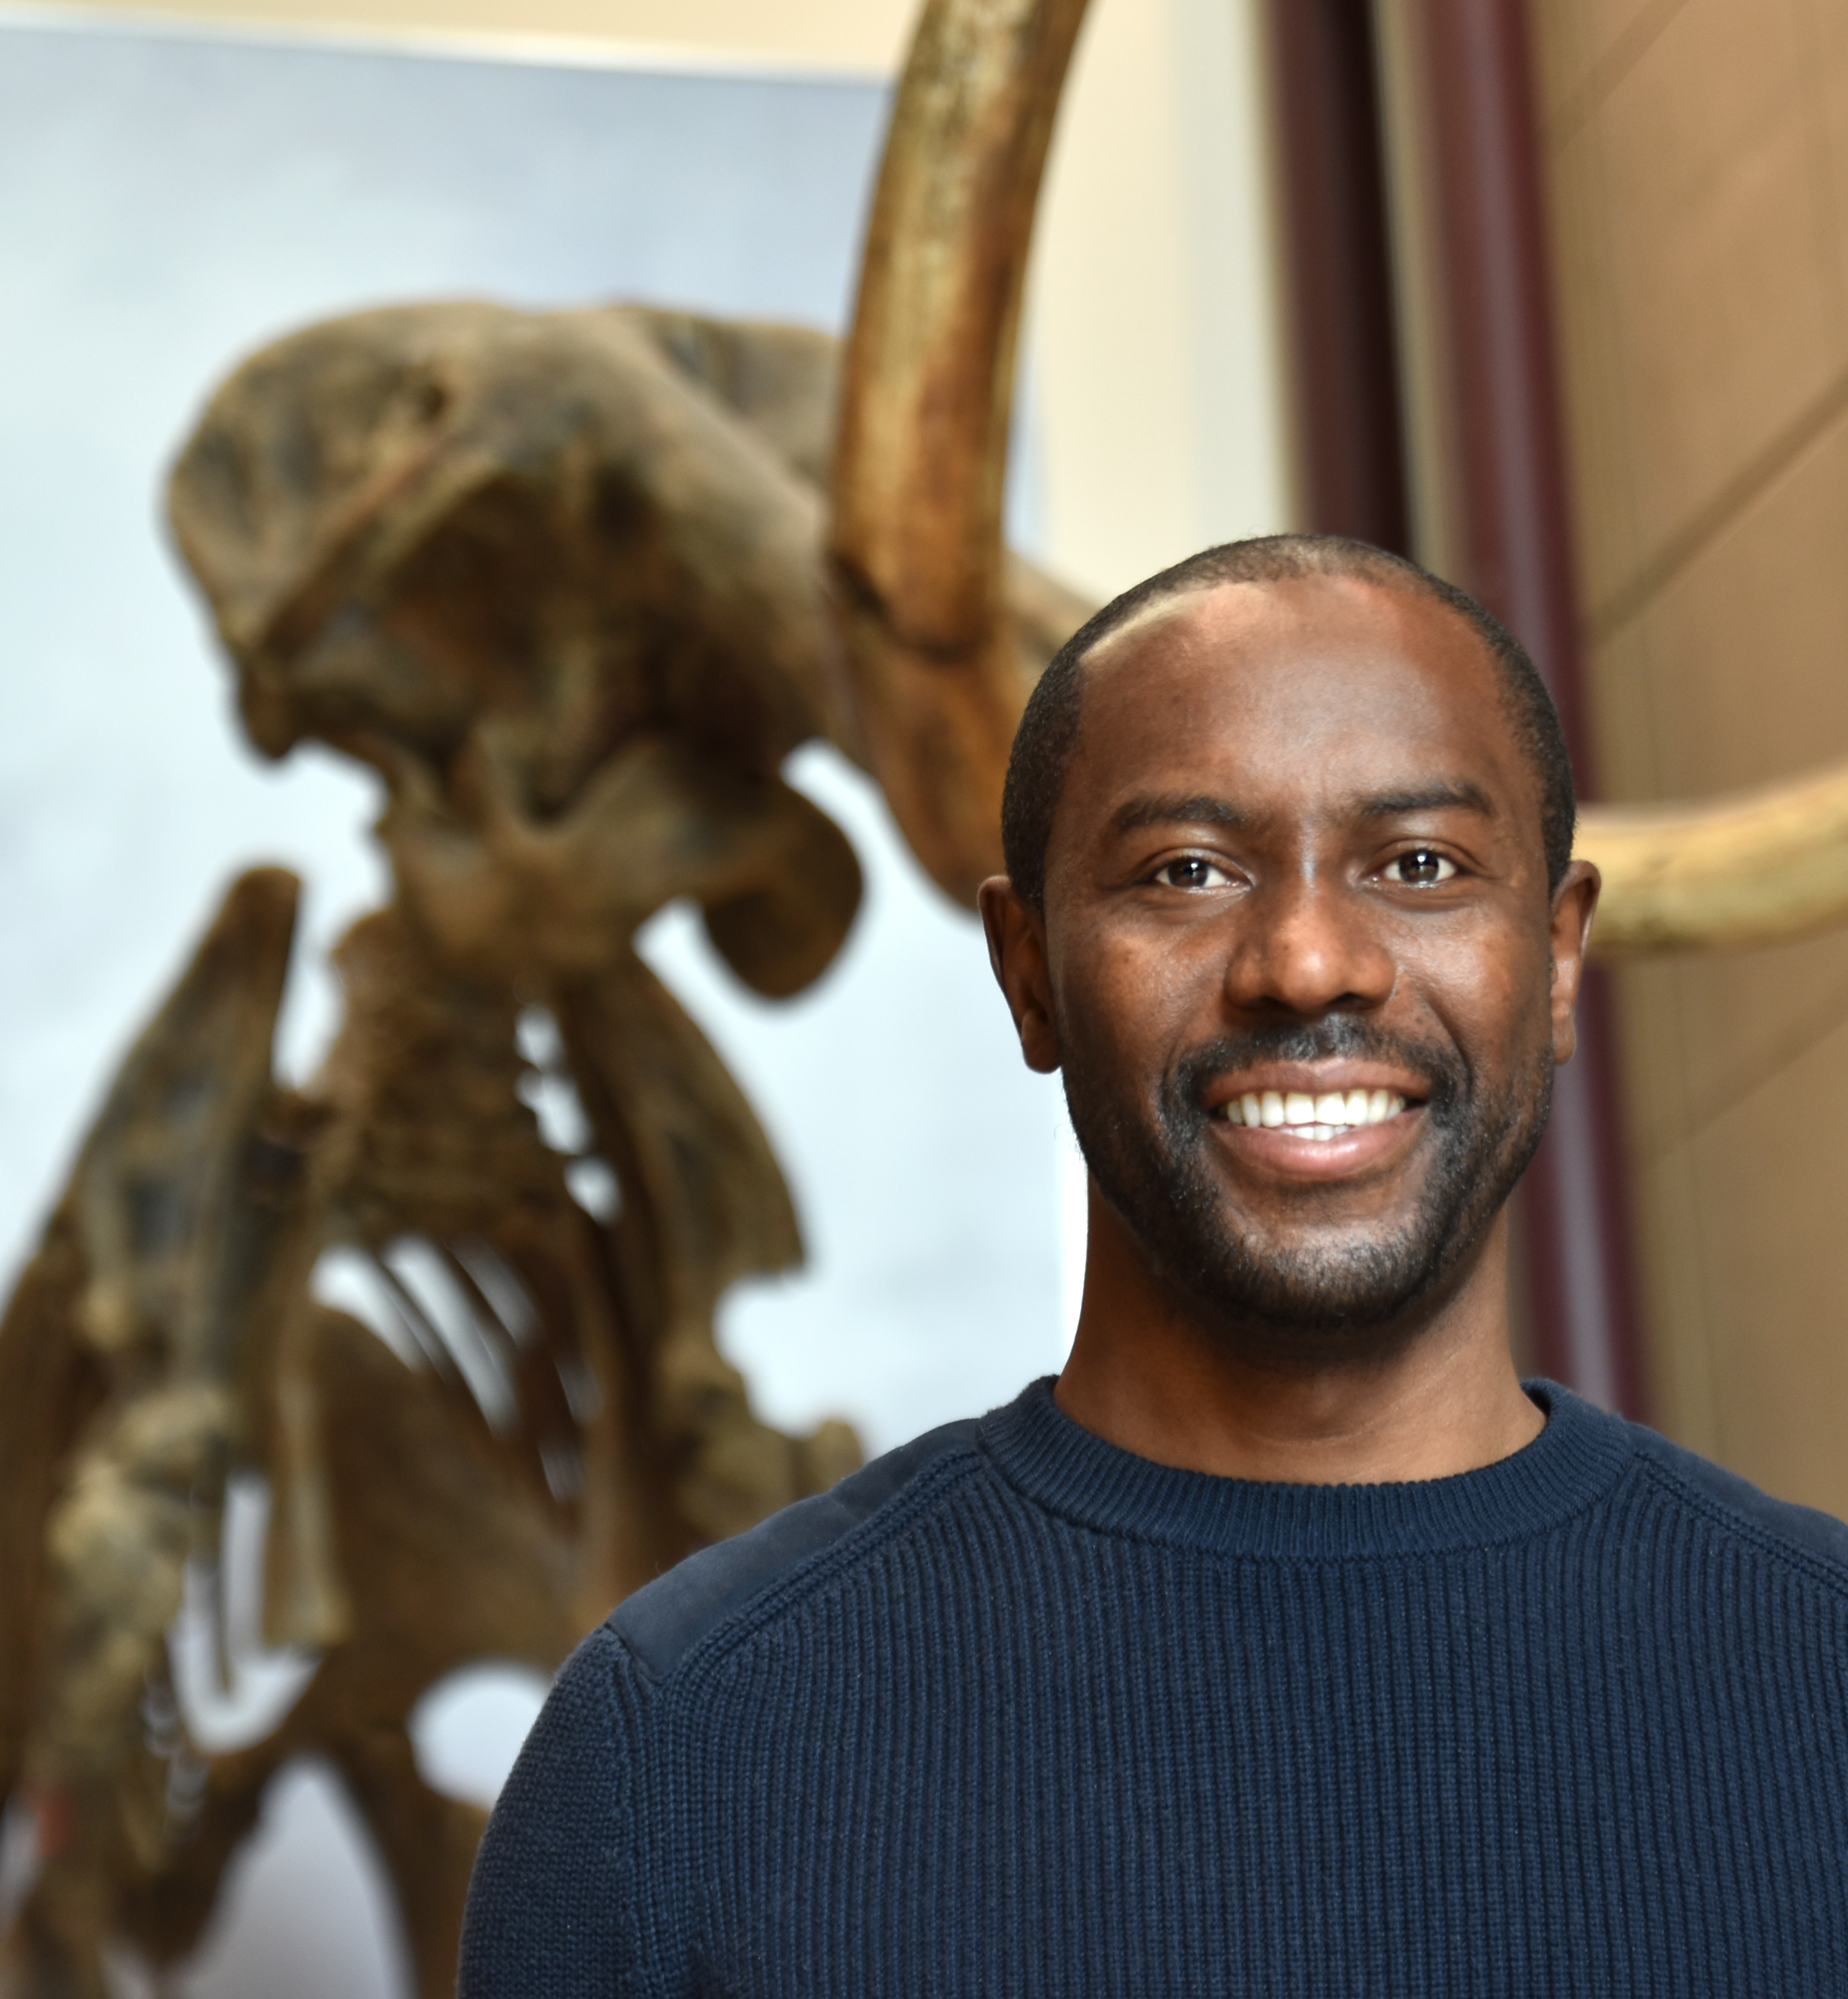 Milwaukee Public Museum Hires Director of Inclusion, Diversity, Equity and Accessiblity (IDEA)